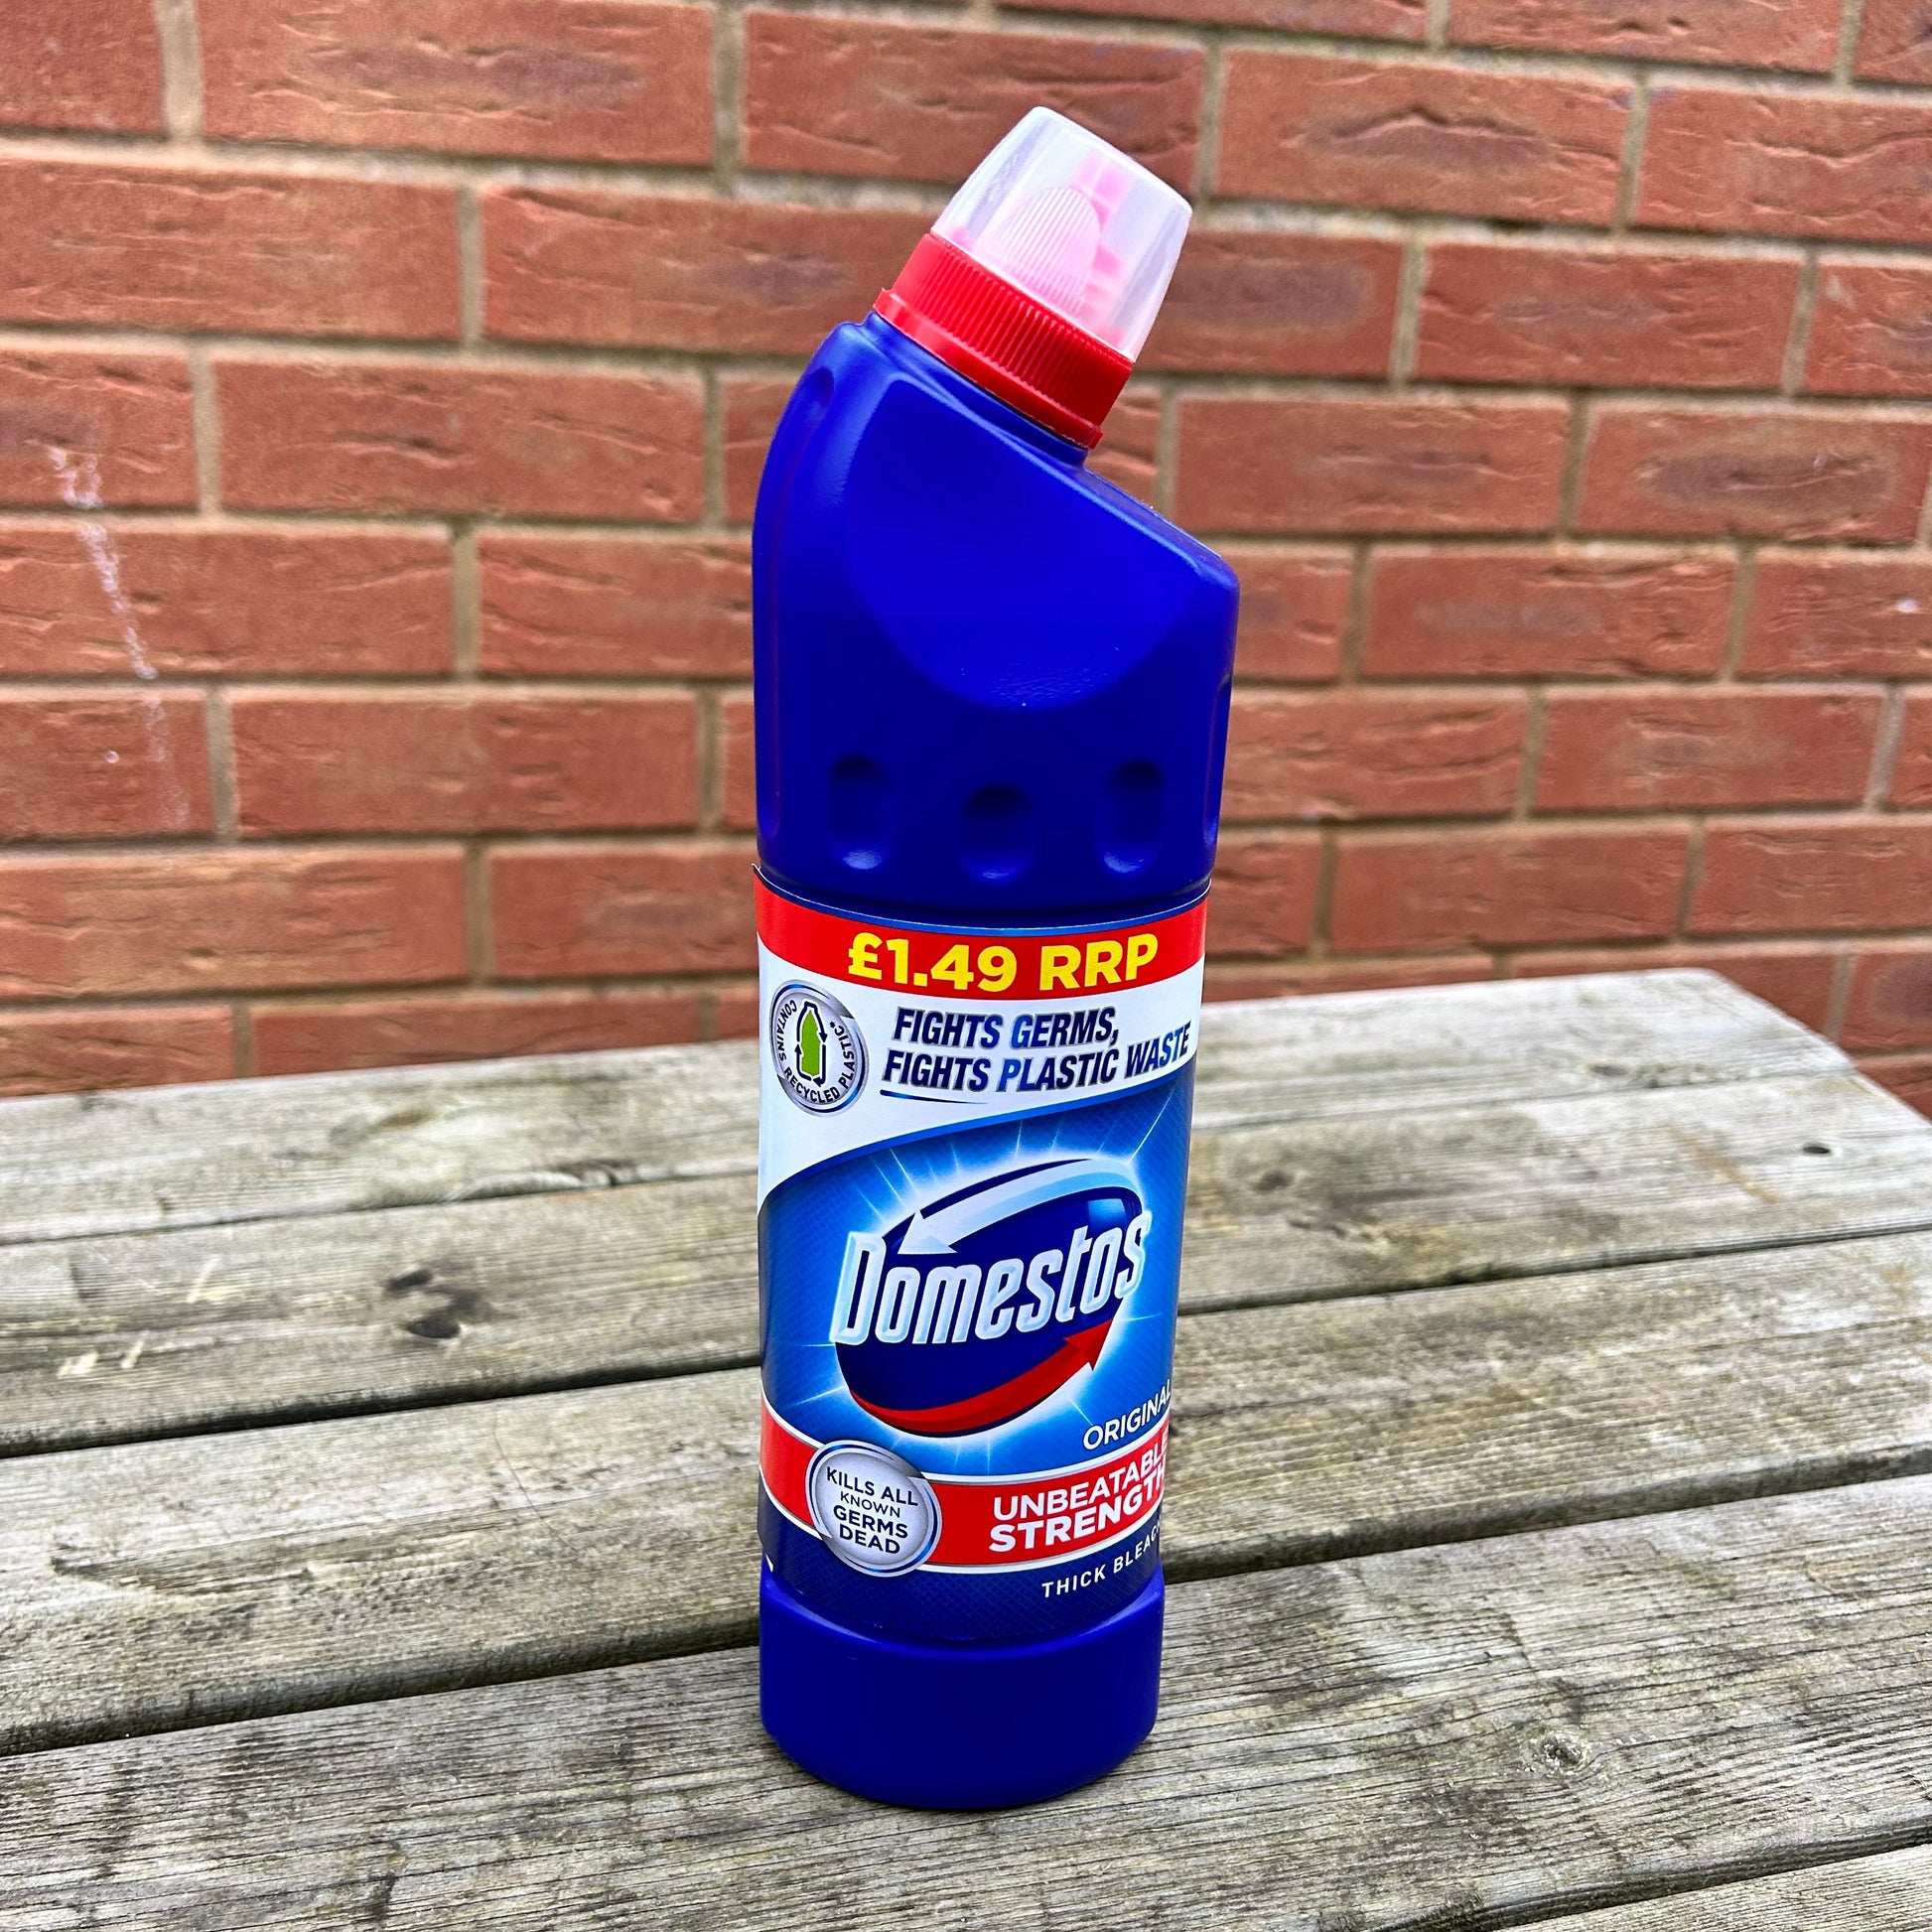 Domestos Bleach Original, 750 ml. Toilet Bleach and Disinfectant. Condition  New.